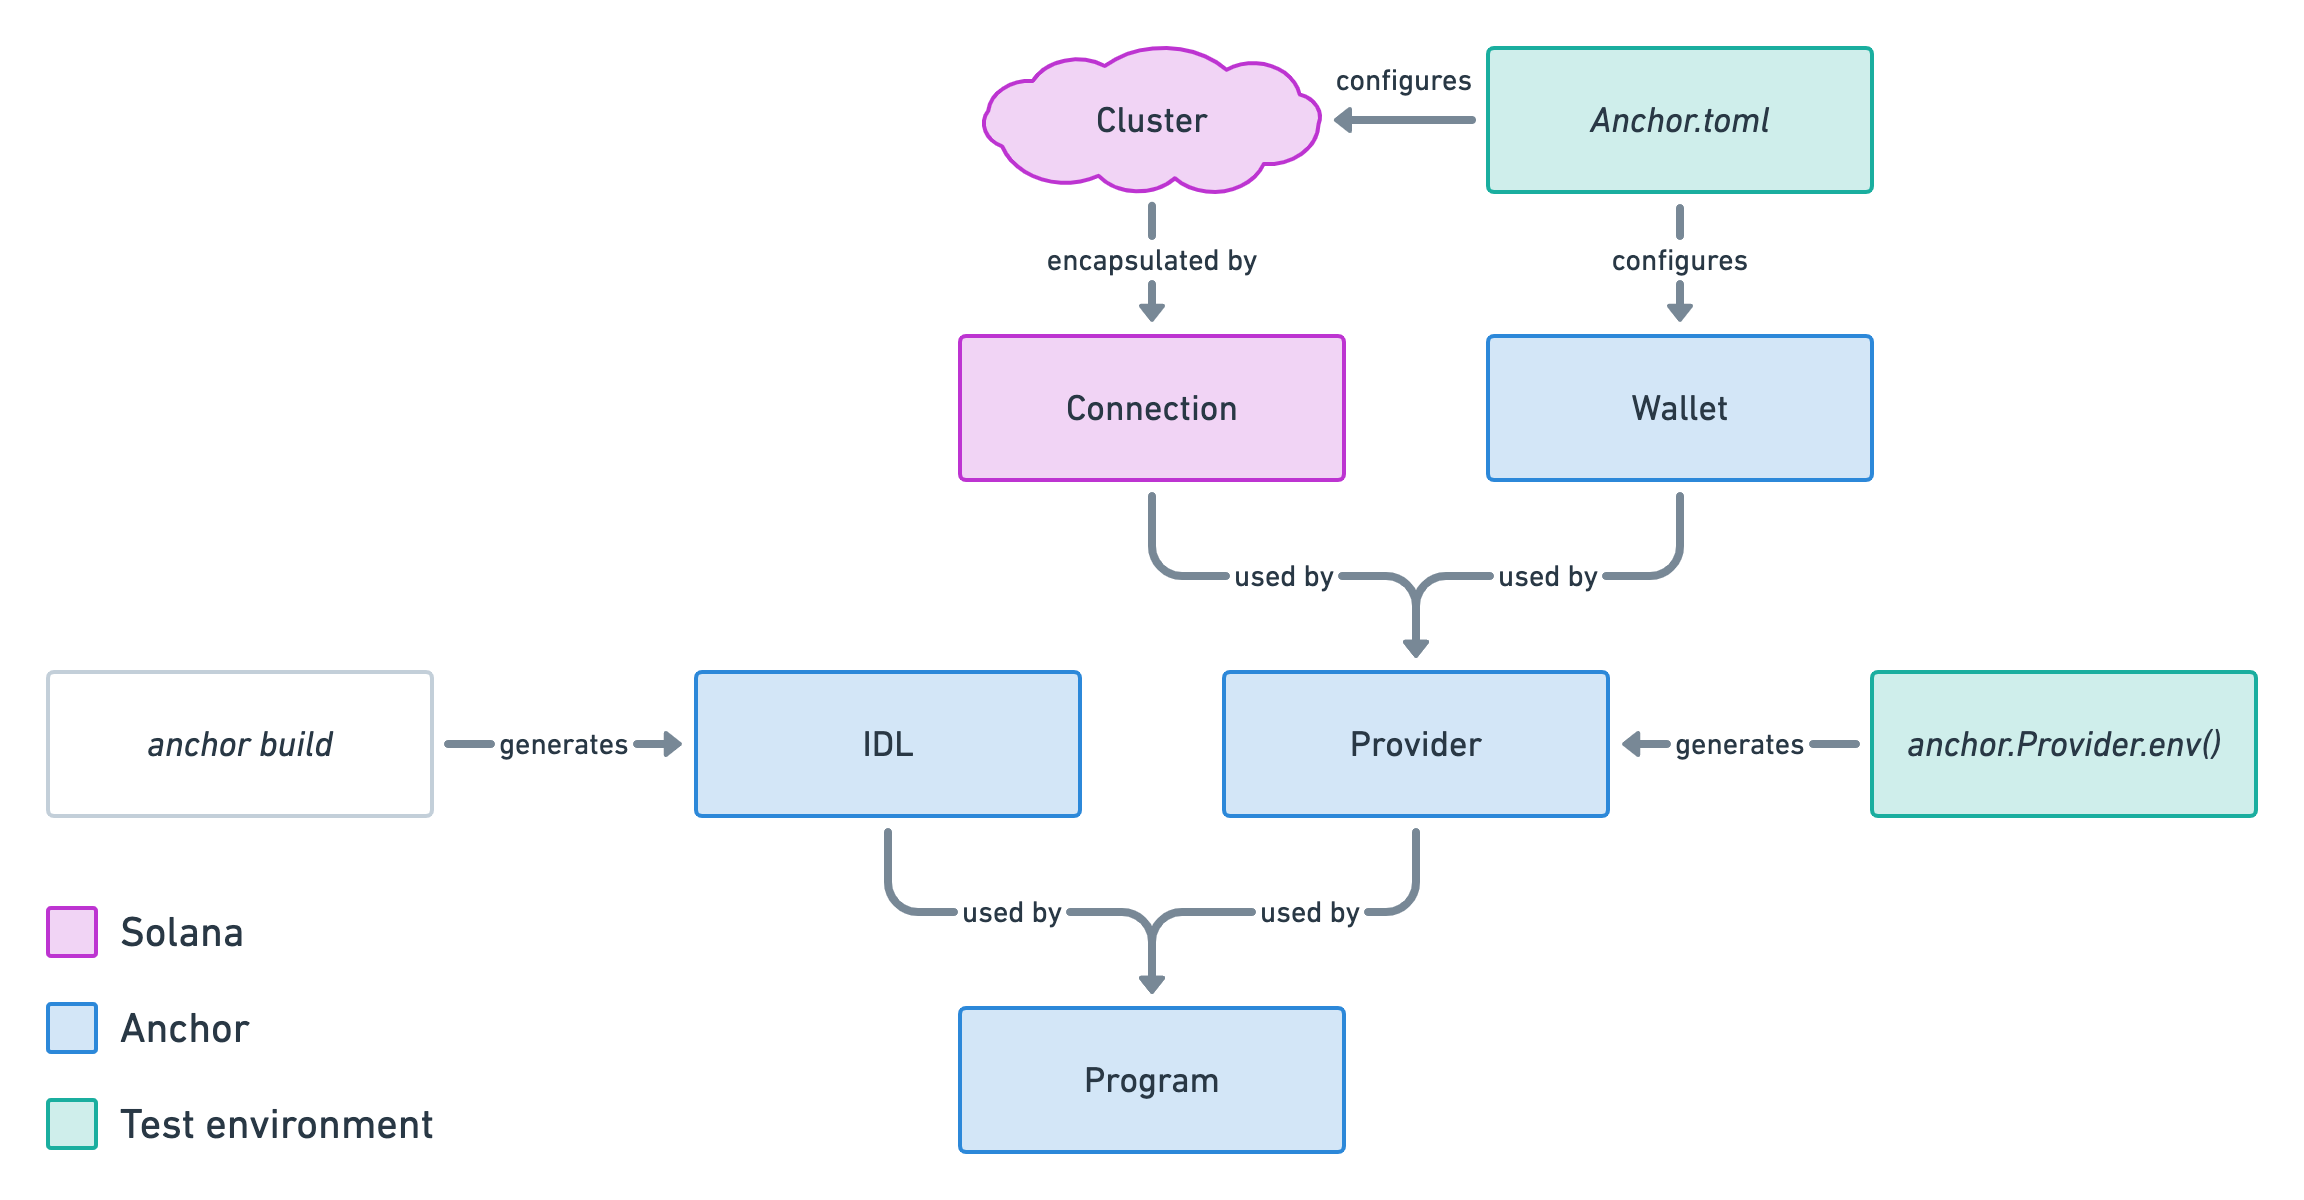 Same diagram as before with 2 more nodes. One node is called "Anchor.toml" that points to both the "Cluster" node and the "Wallet" node. Both of these arrows say "configures" on them. The other new node is called "anchor.Provider.env()" and points to the "Provider" node. The arrow here says "generates".